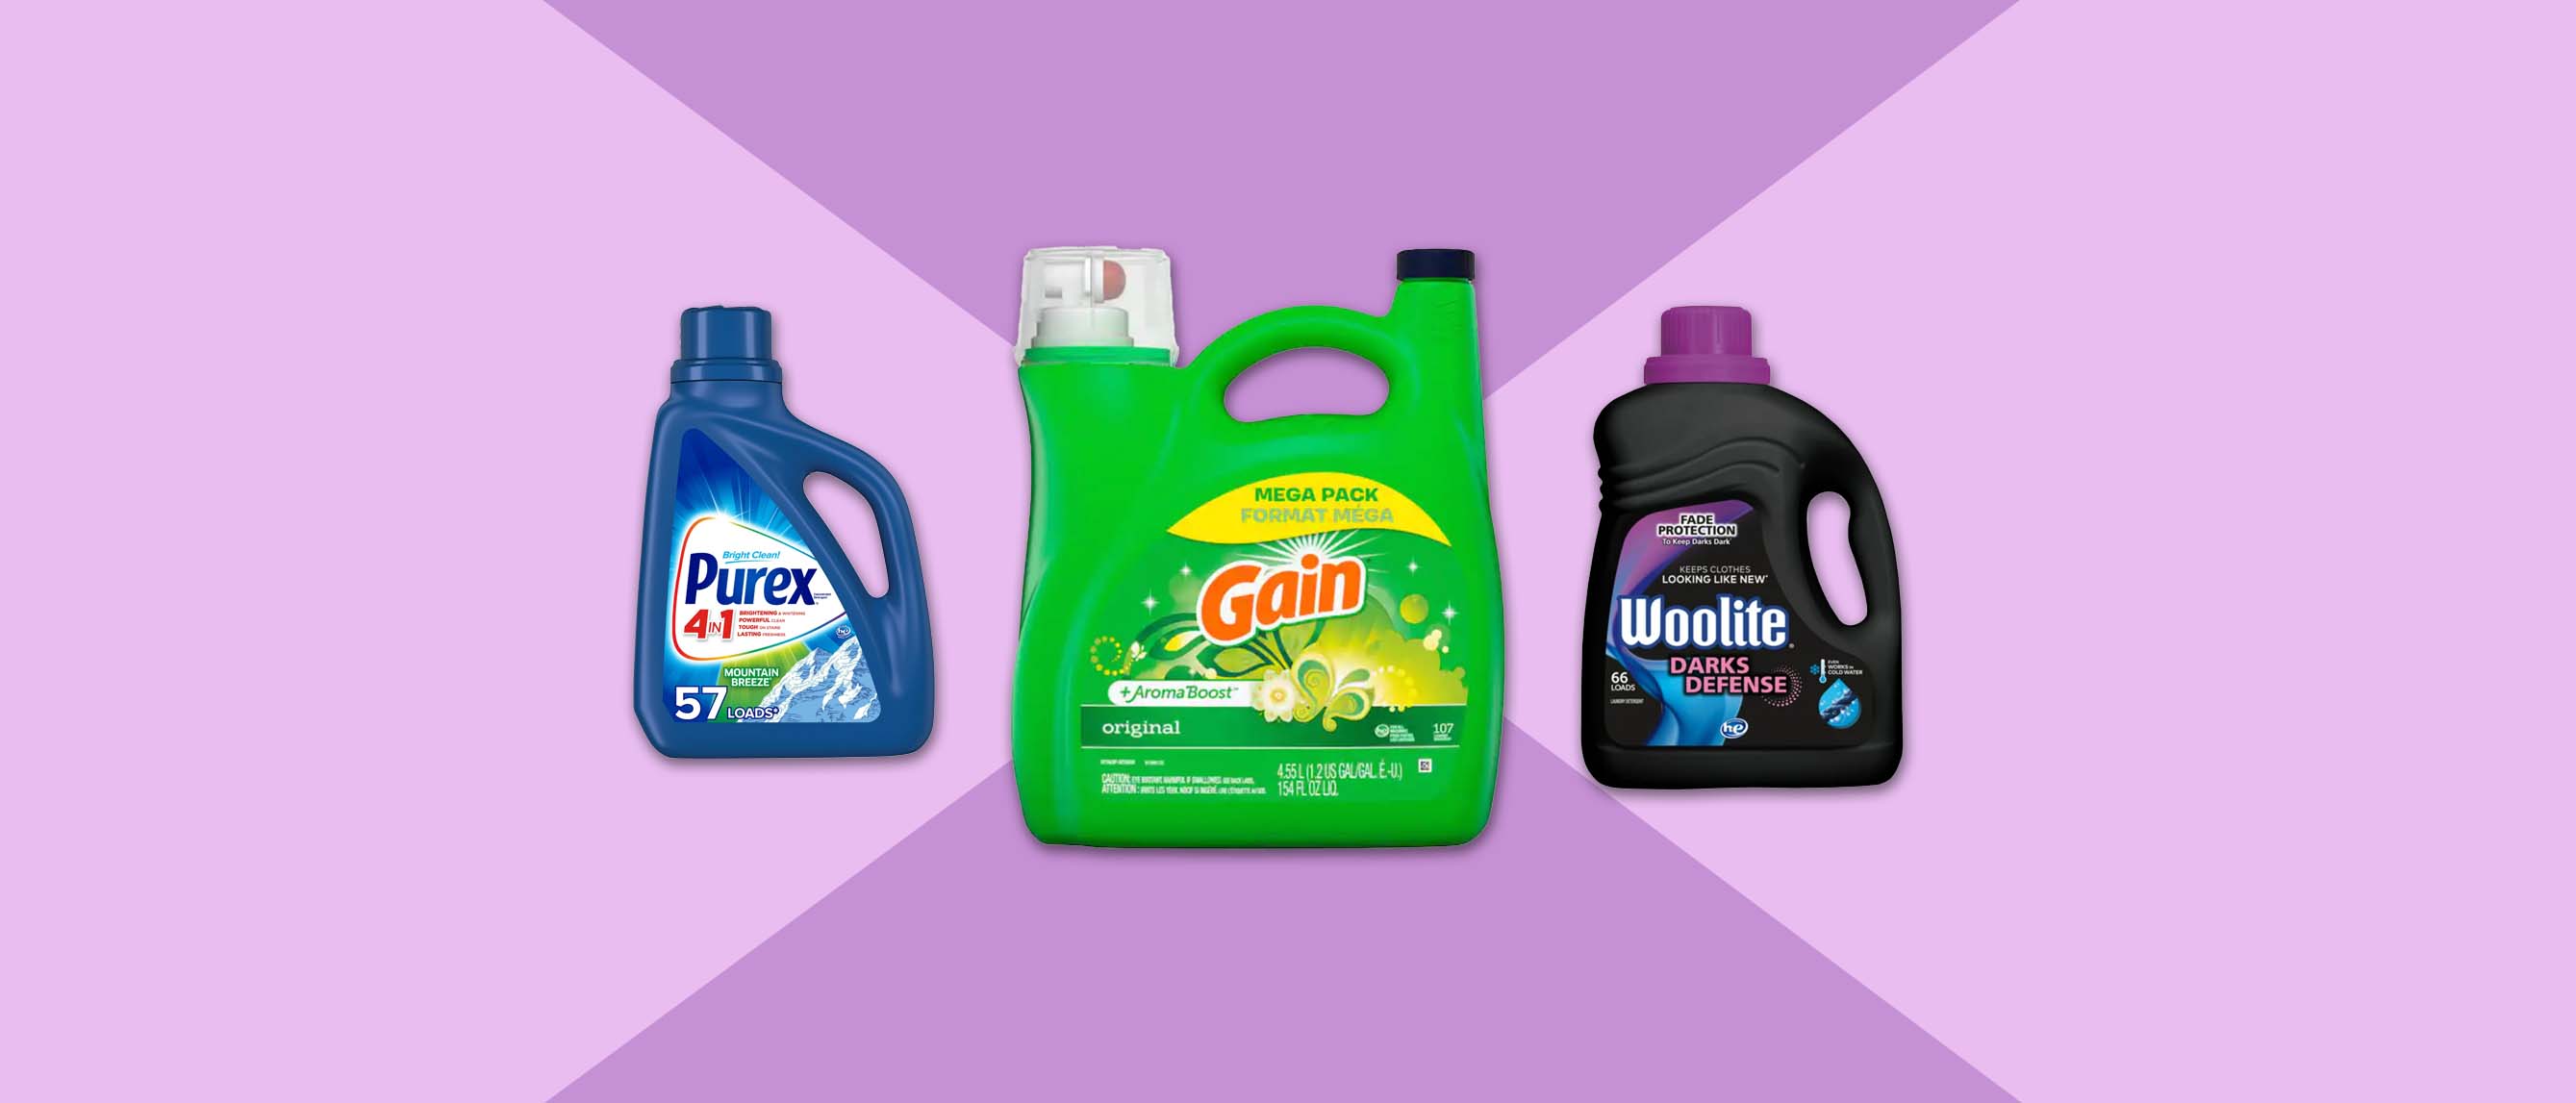 Image of three laundry detergents including Gain, Purex and Woolite